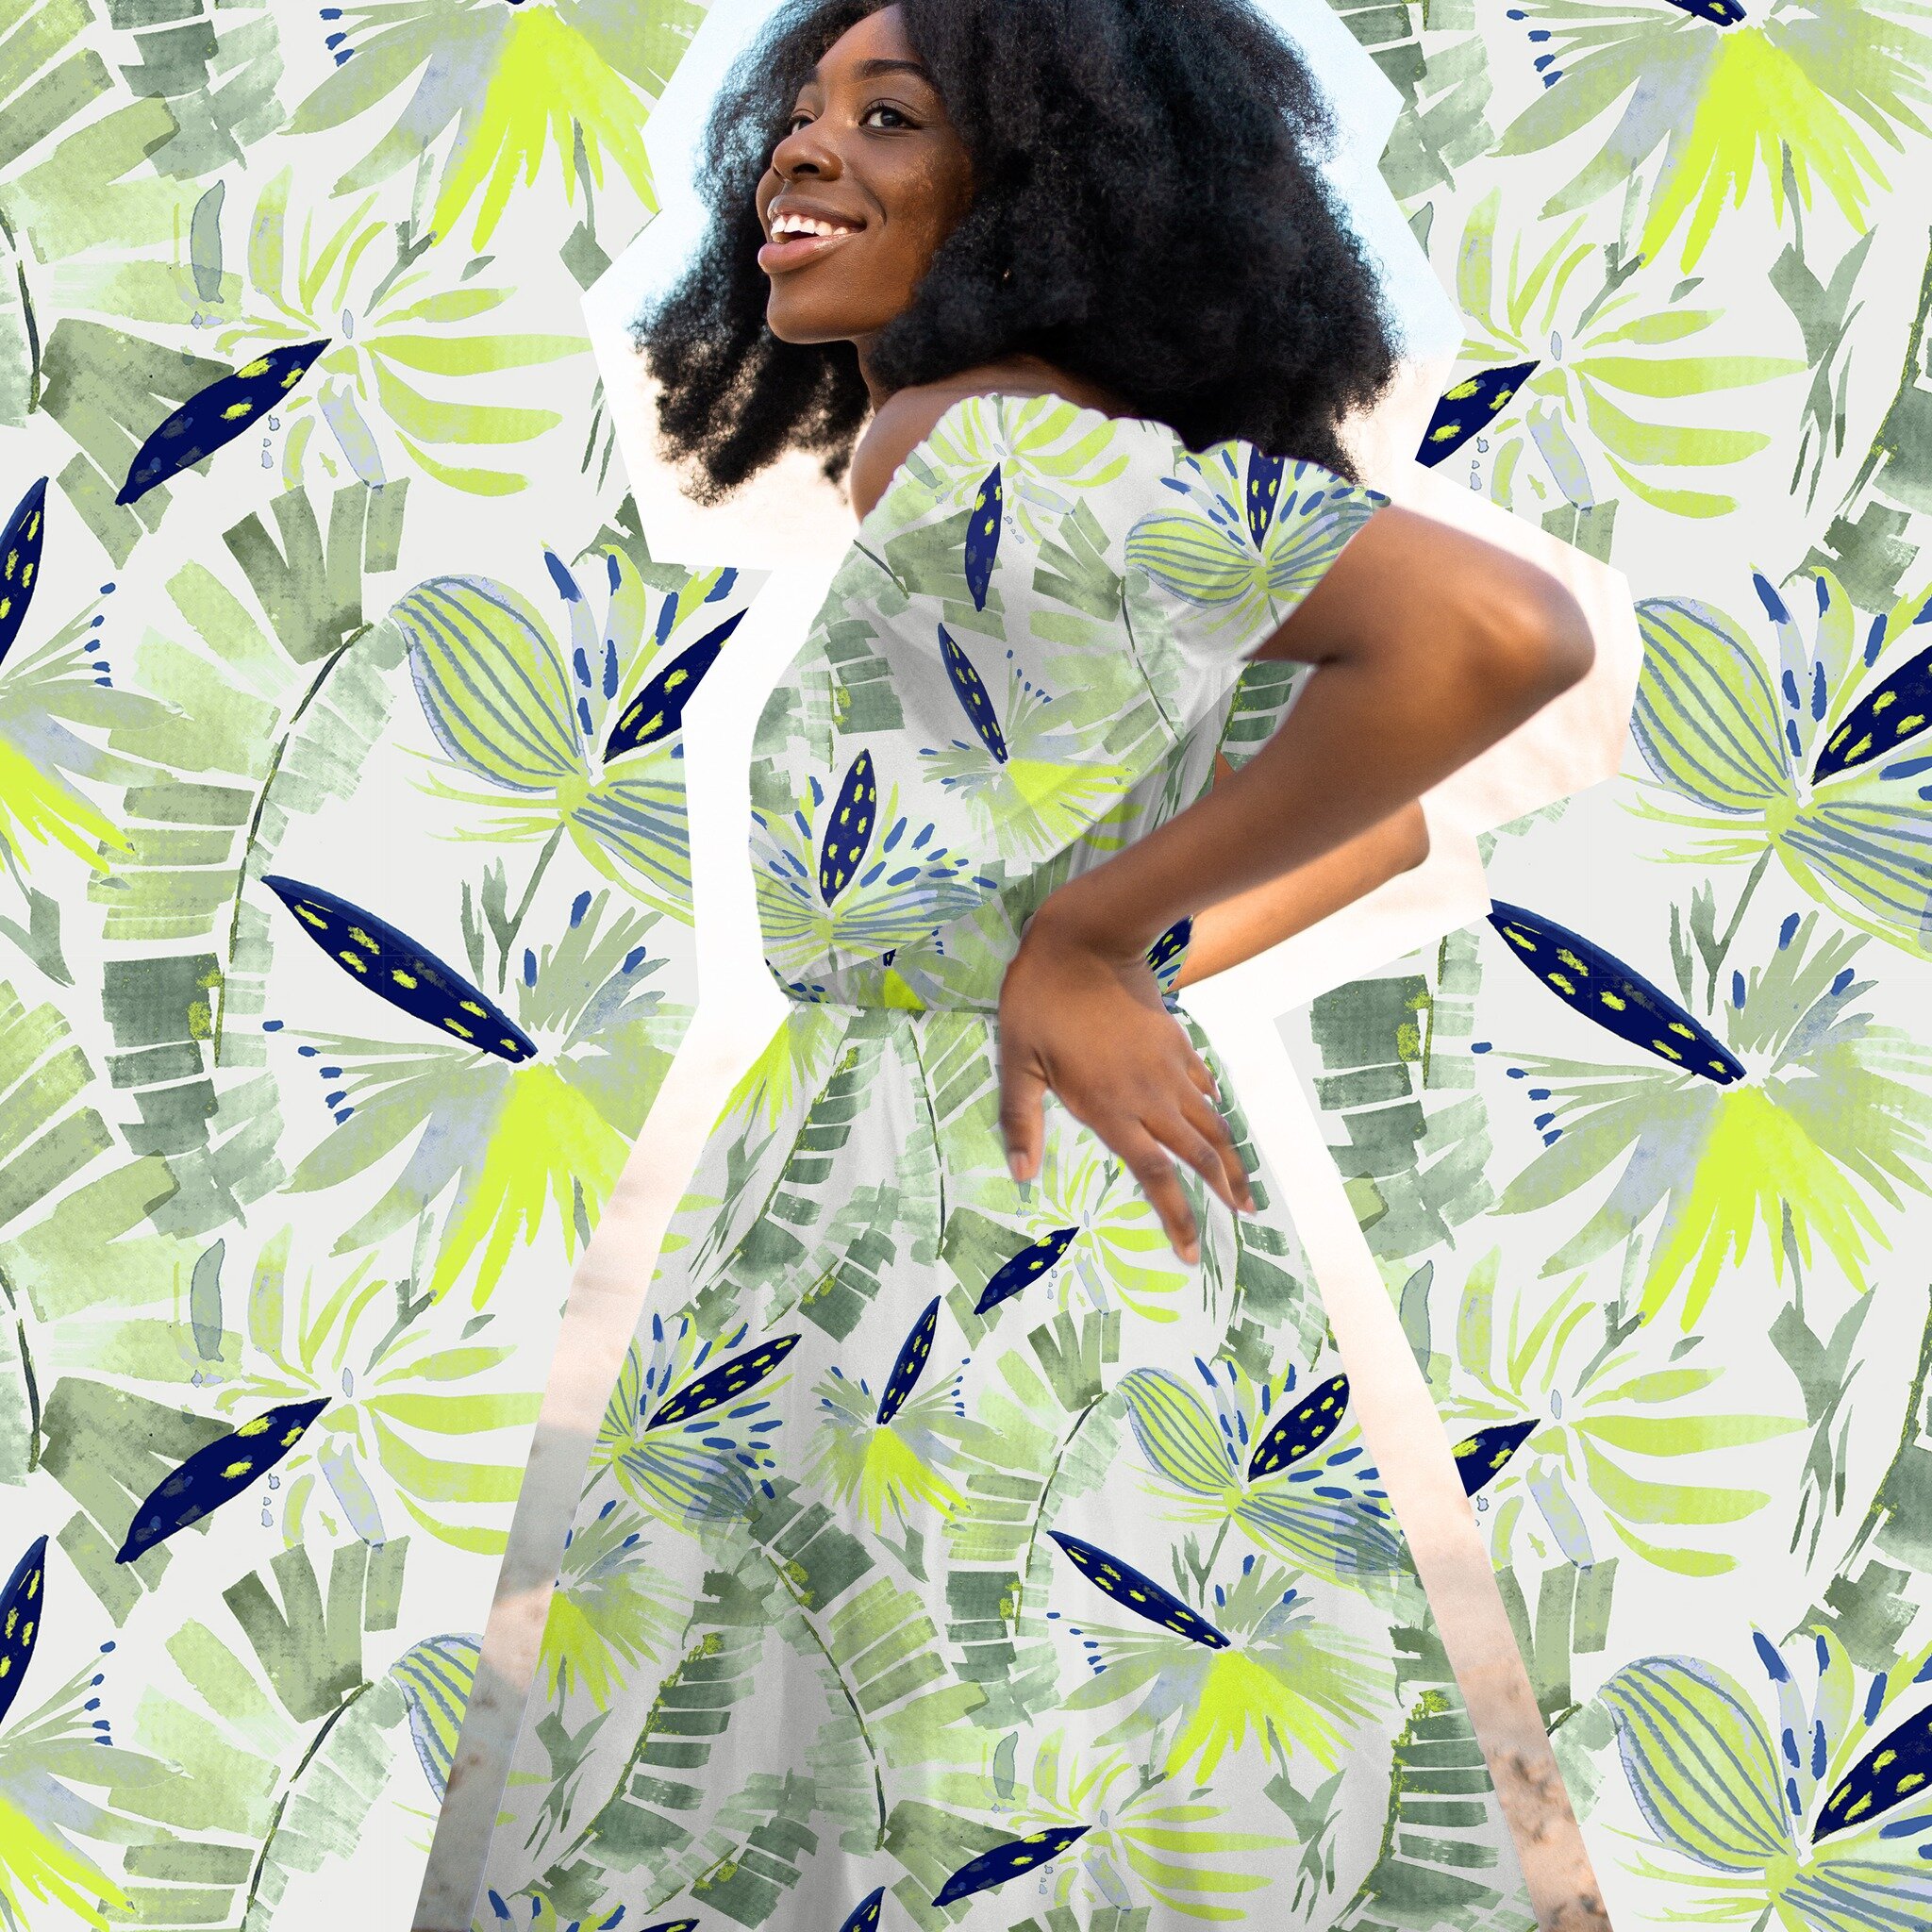 Monday happies with this gestural tropical from @lillianfarag 🌴 💚 ☀️ All prints are available for purchase online, link in bio or shoot Olivia a note at sales@sullivanstreetstudio.com!

#tropicalpattern #tropicalprint #printdesignstudio #printdesig